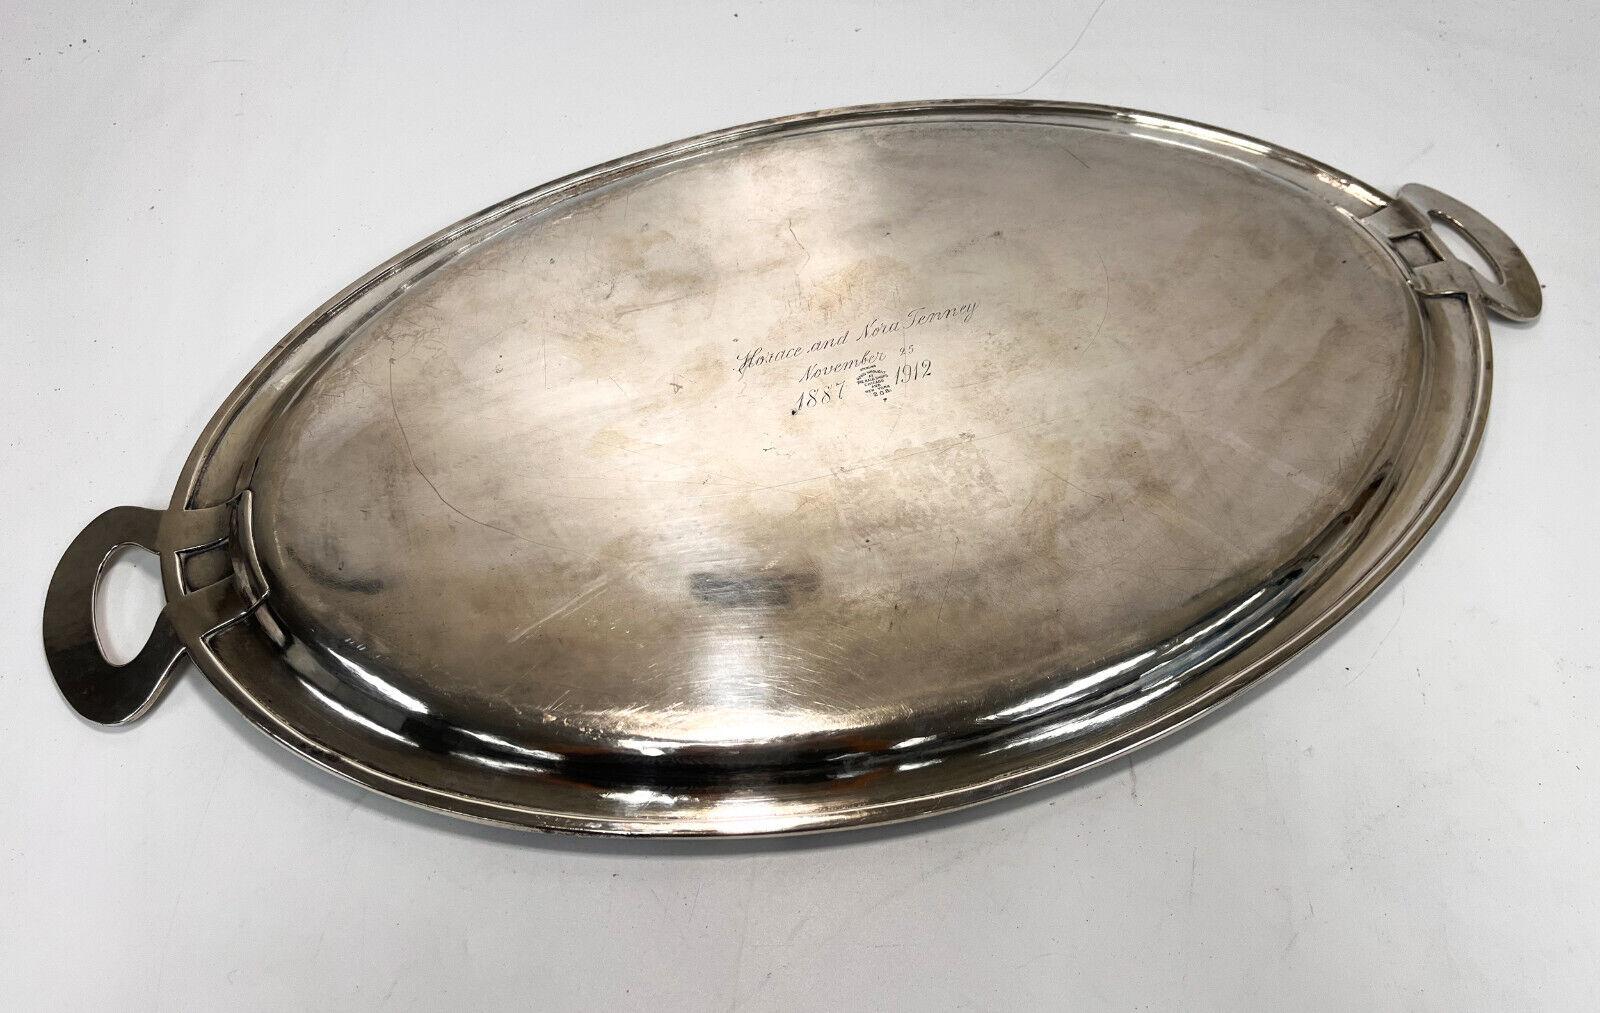  The Kalo Shops Sterling Silver Hand Wrought Handled Oval Serving Tray #208 c191 For Sale 1